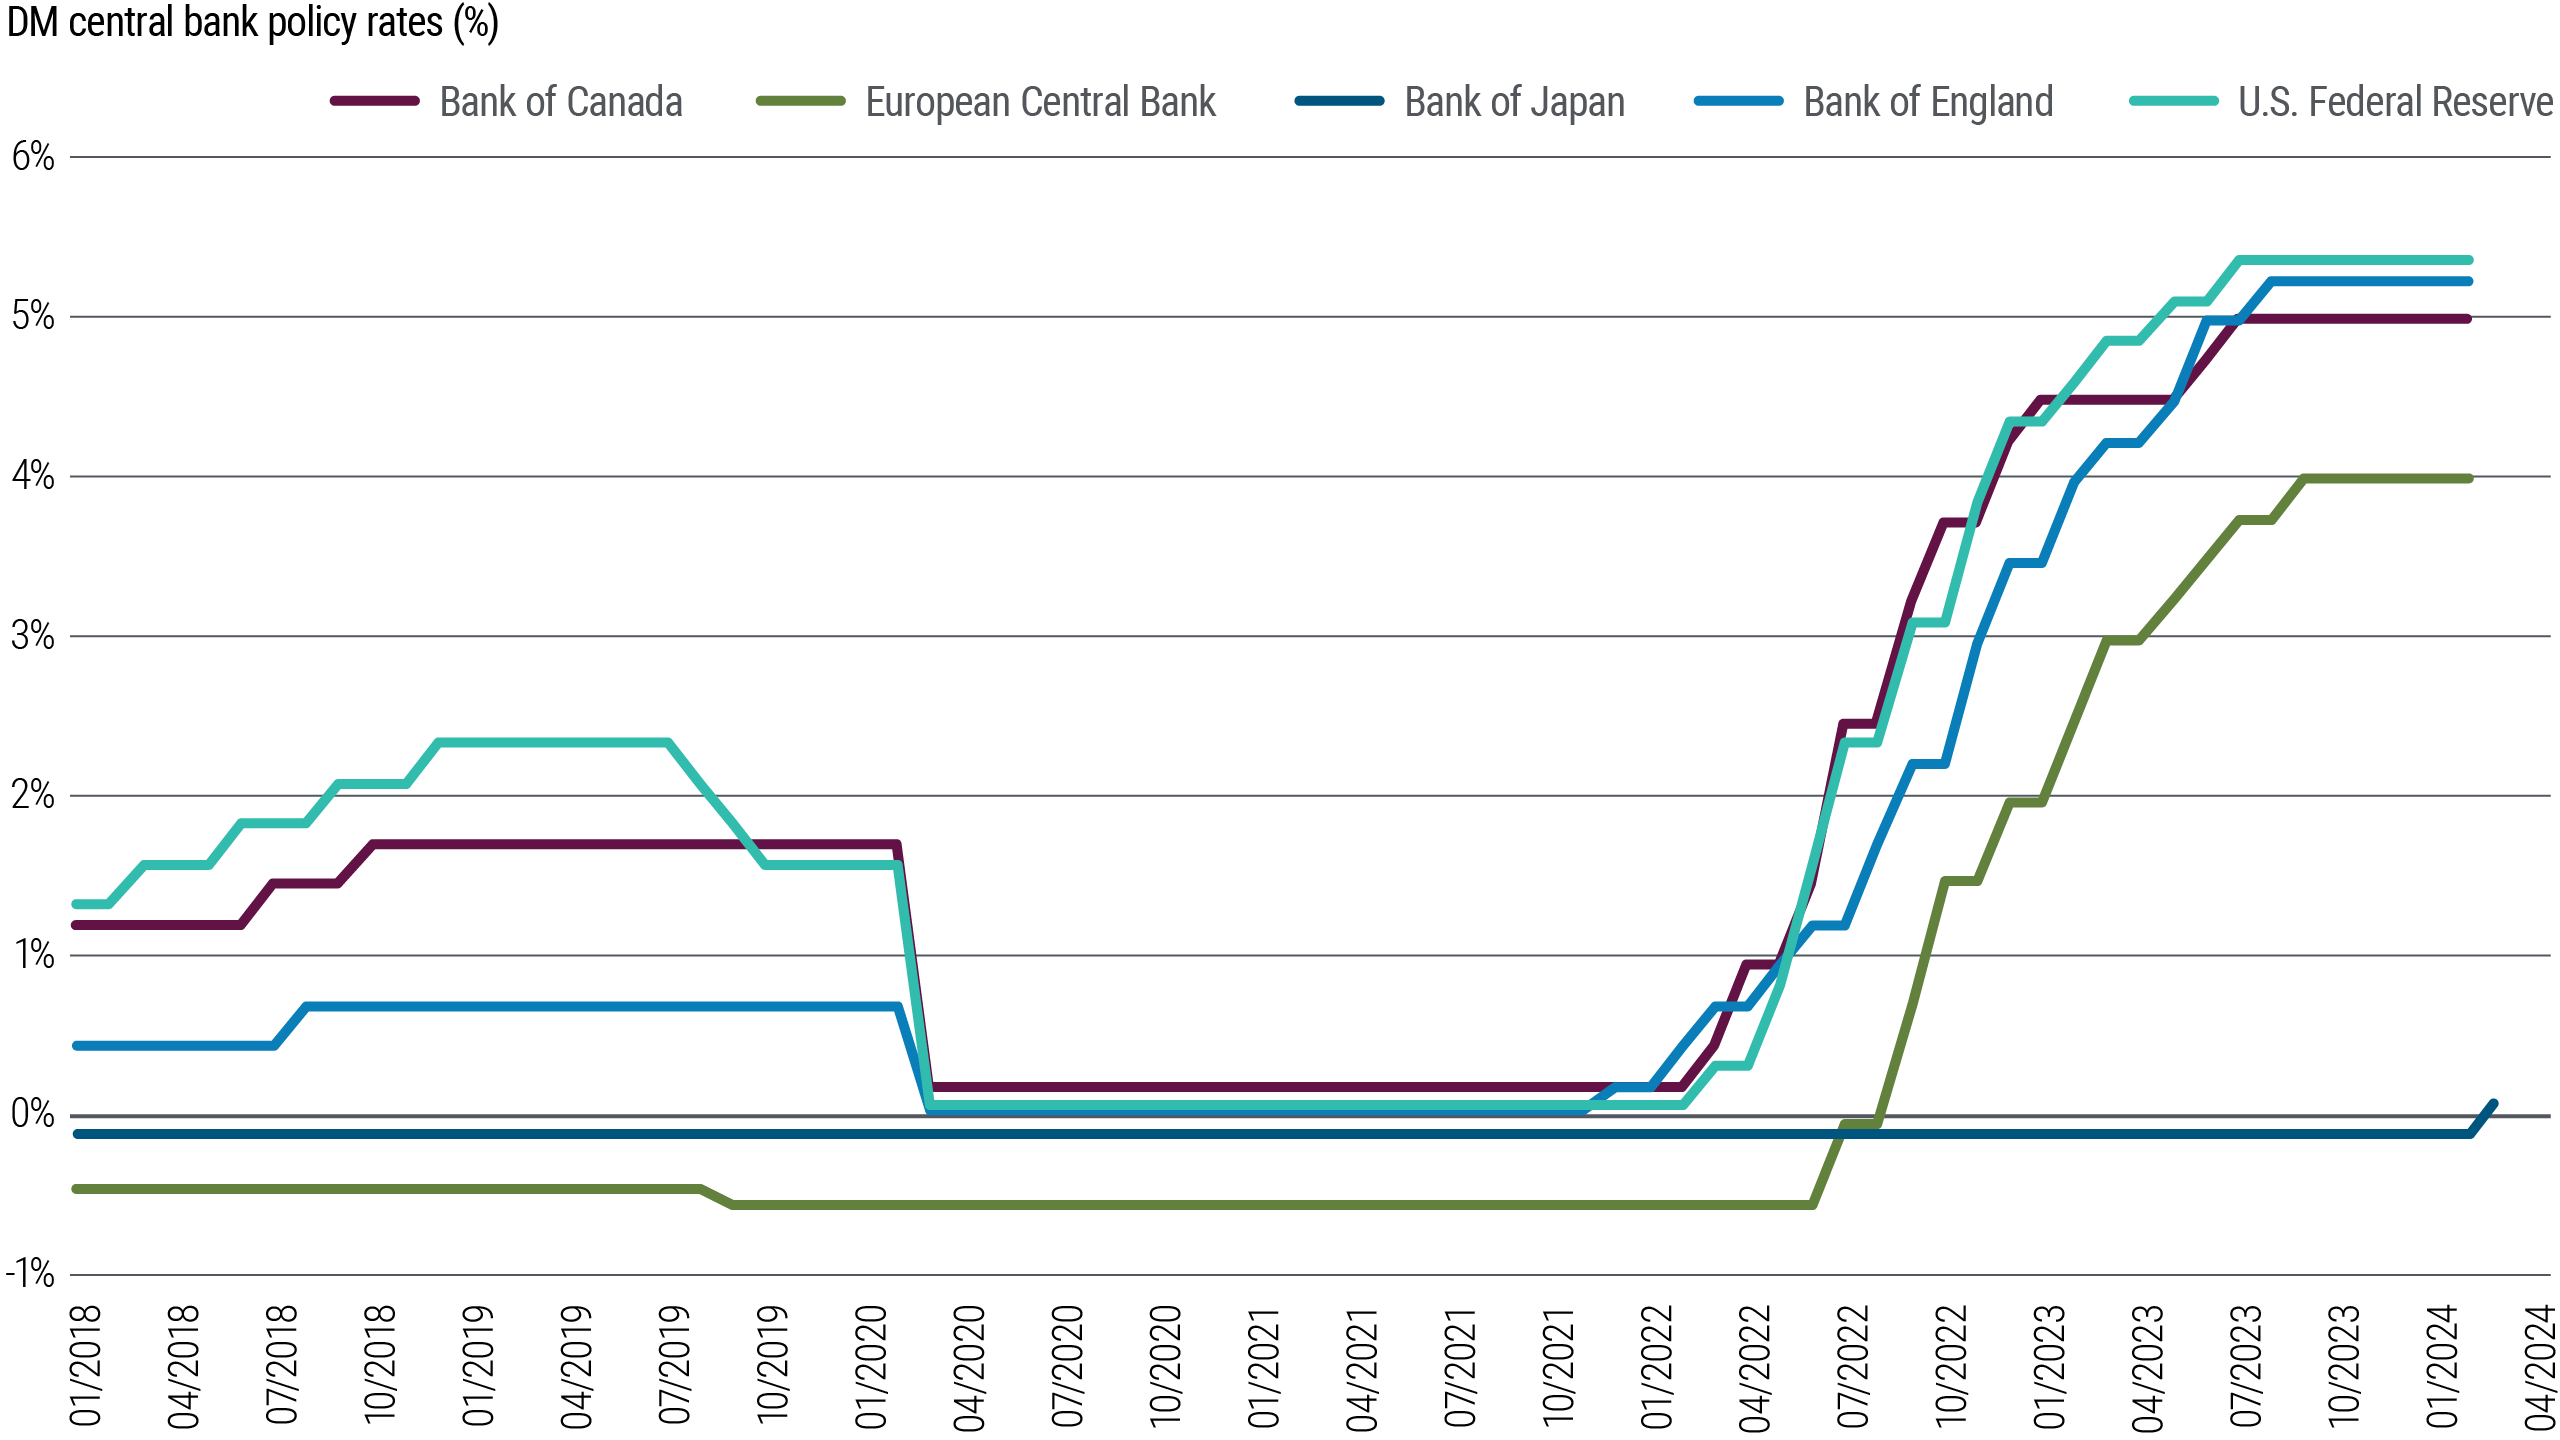 Figure 4 is a line chart showing central bank policy rates in the U.S. (Federal Reserve), eurozone, U.K., Japan, and Canada from 2018 through present (March 2024). Except the Bank of Japan, all these central banks began to hike rates up from their pandemic-driven lows near (or below) 0% amid the pandemic as inflation spiked in 2021 and 2022. They have paused since 2023 at peaks of 5.25%–5.5% (Fed) and 4% (European Central Bank), while the Bank of Japan just lifted its policy rate slightly above zero in March 2024. 